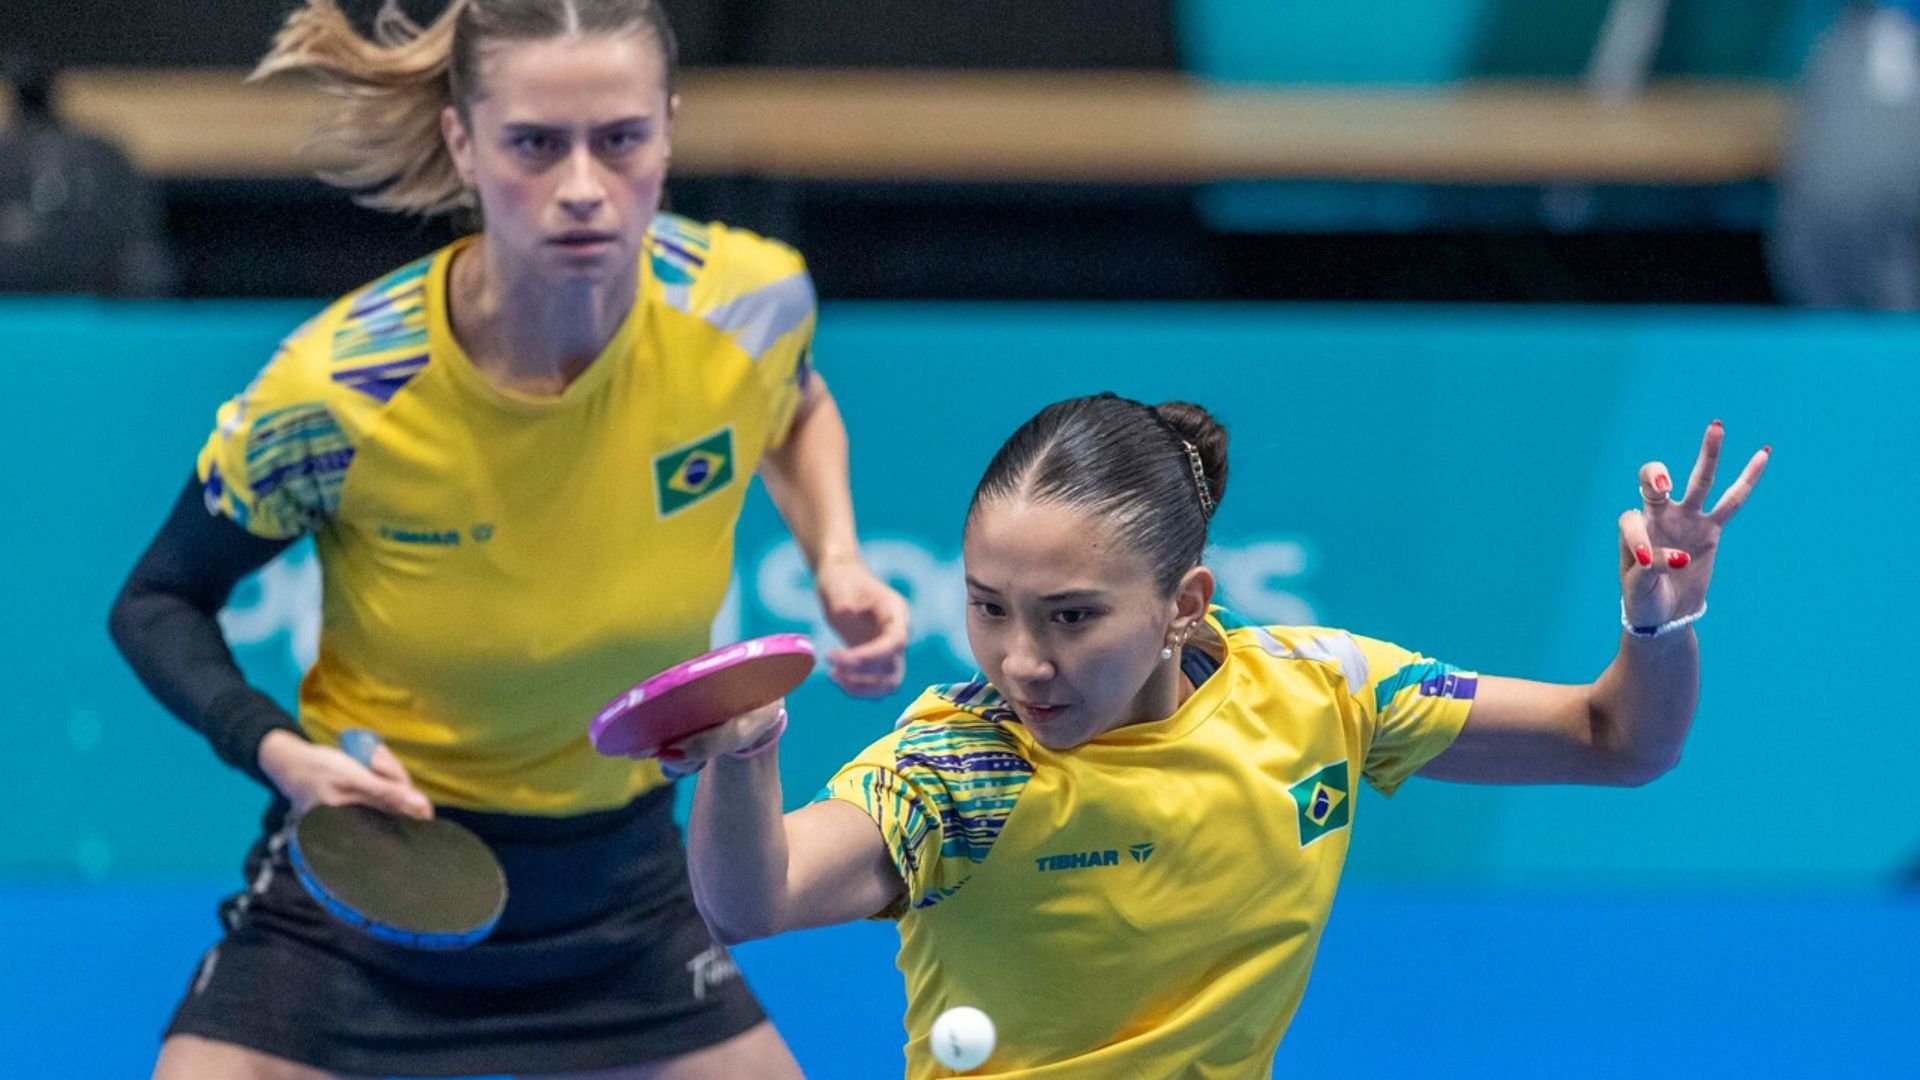 The Brazilian sisters Takahashi make a triumphant debut in table tennis